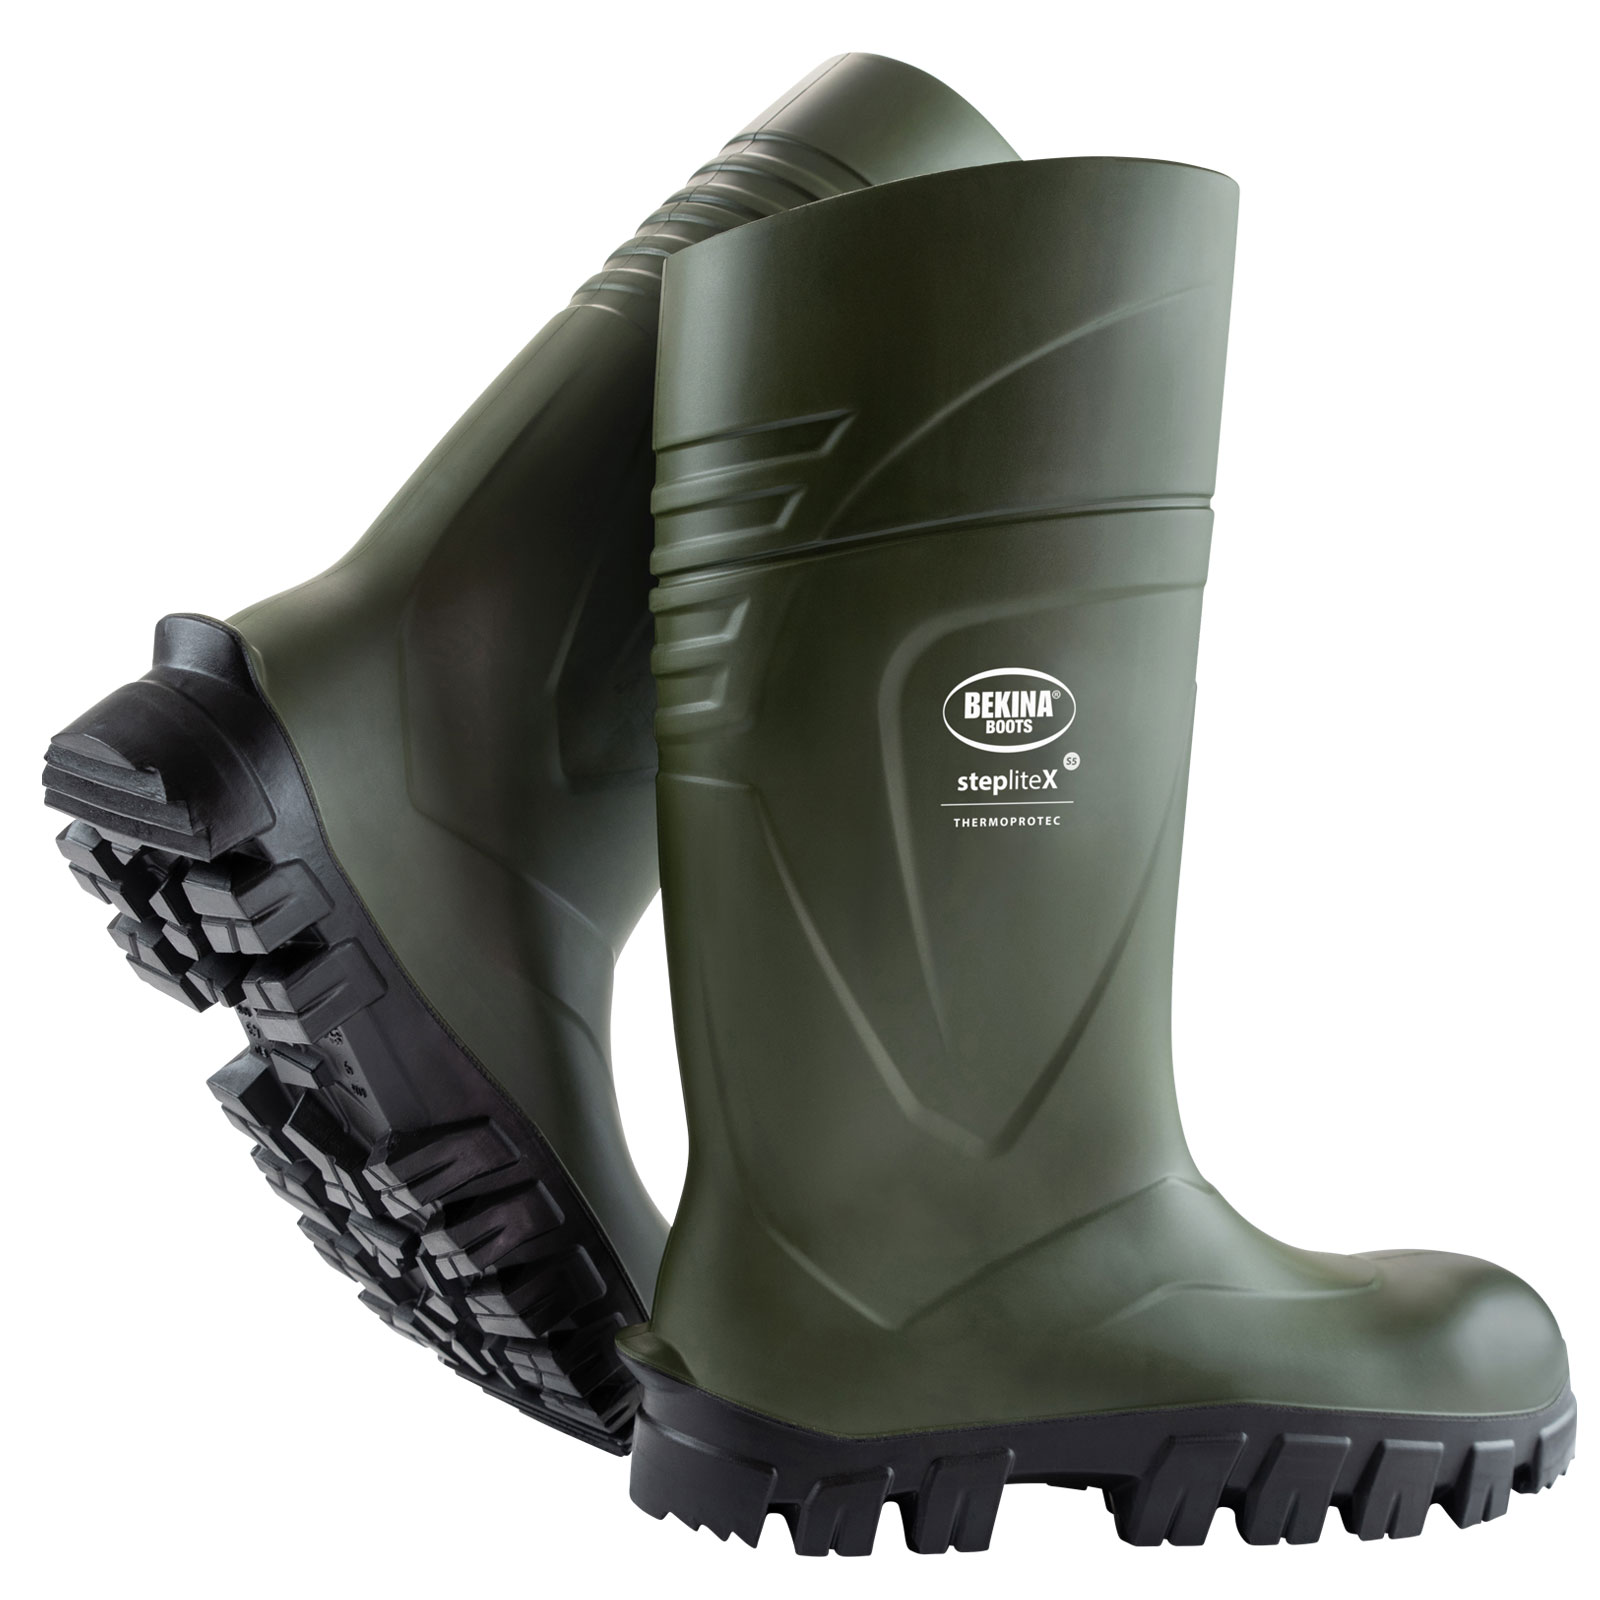 Bekina StepliteX ThermoProtect XCi s5 winter safety boots 43